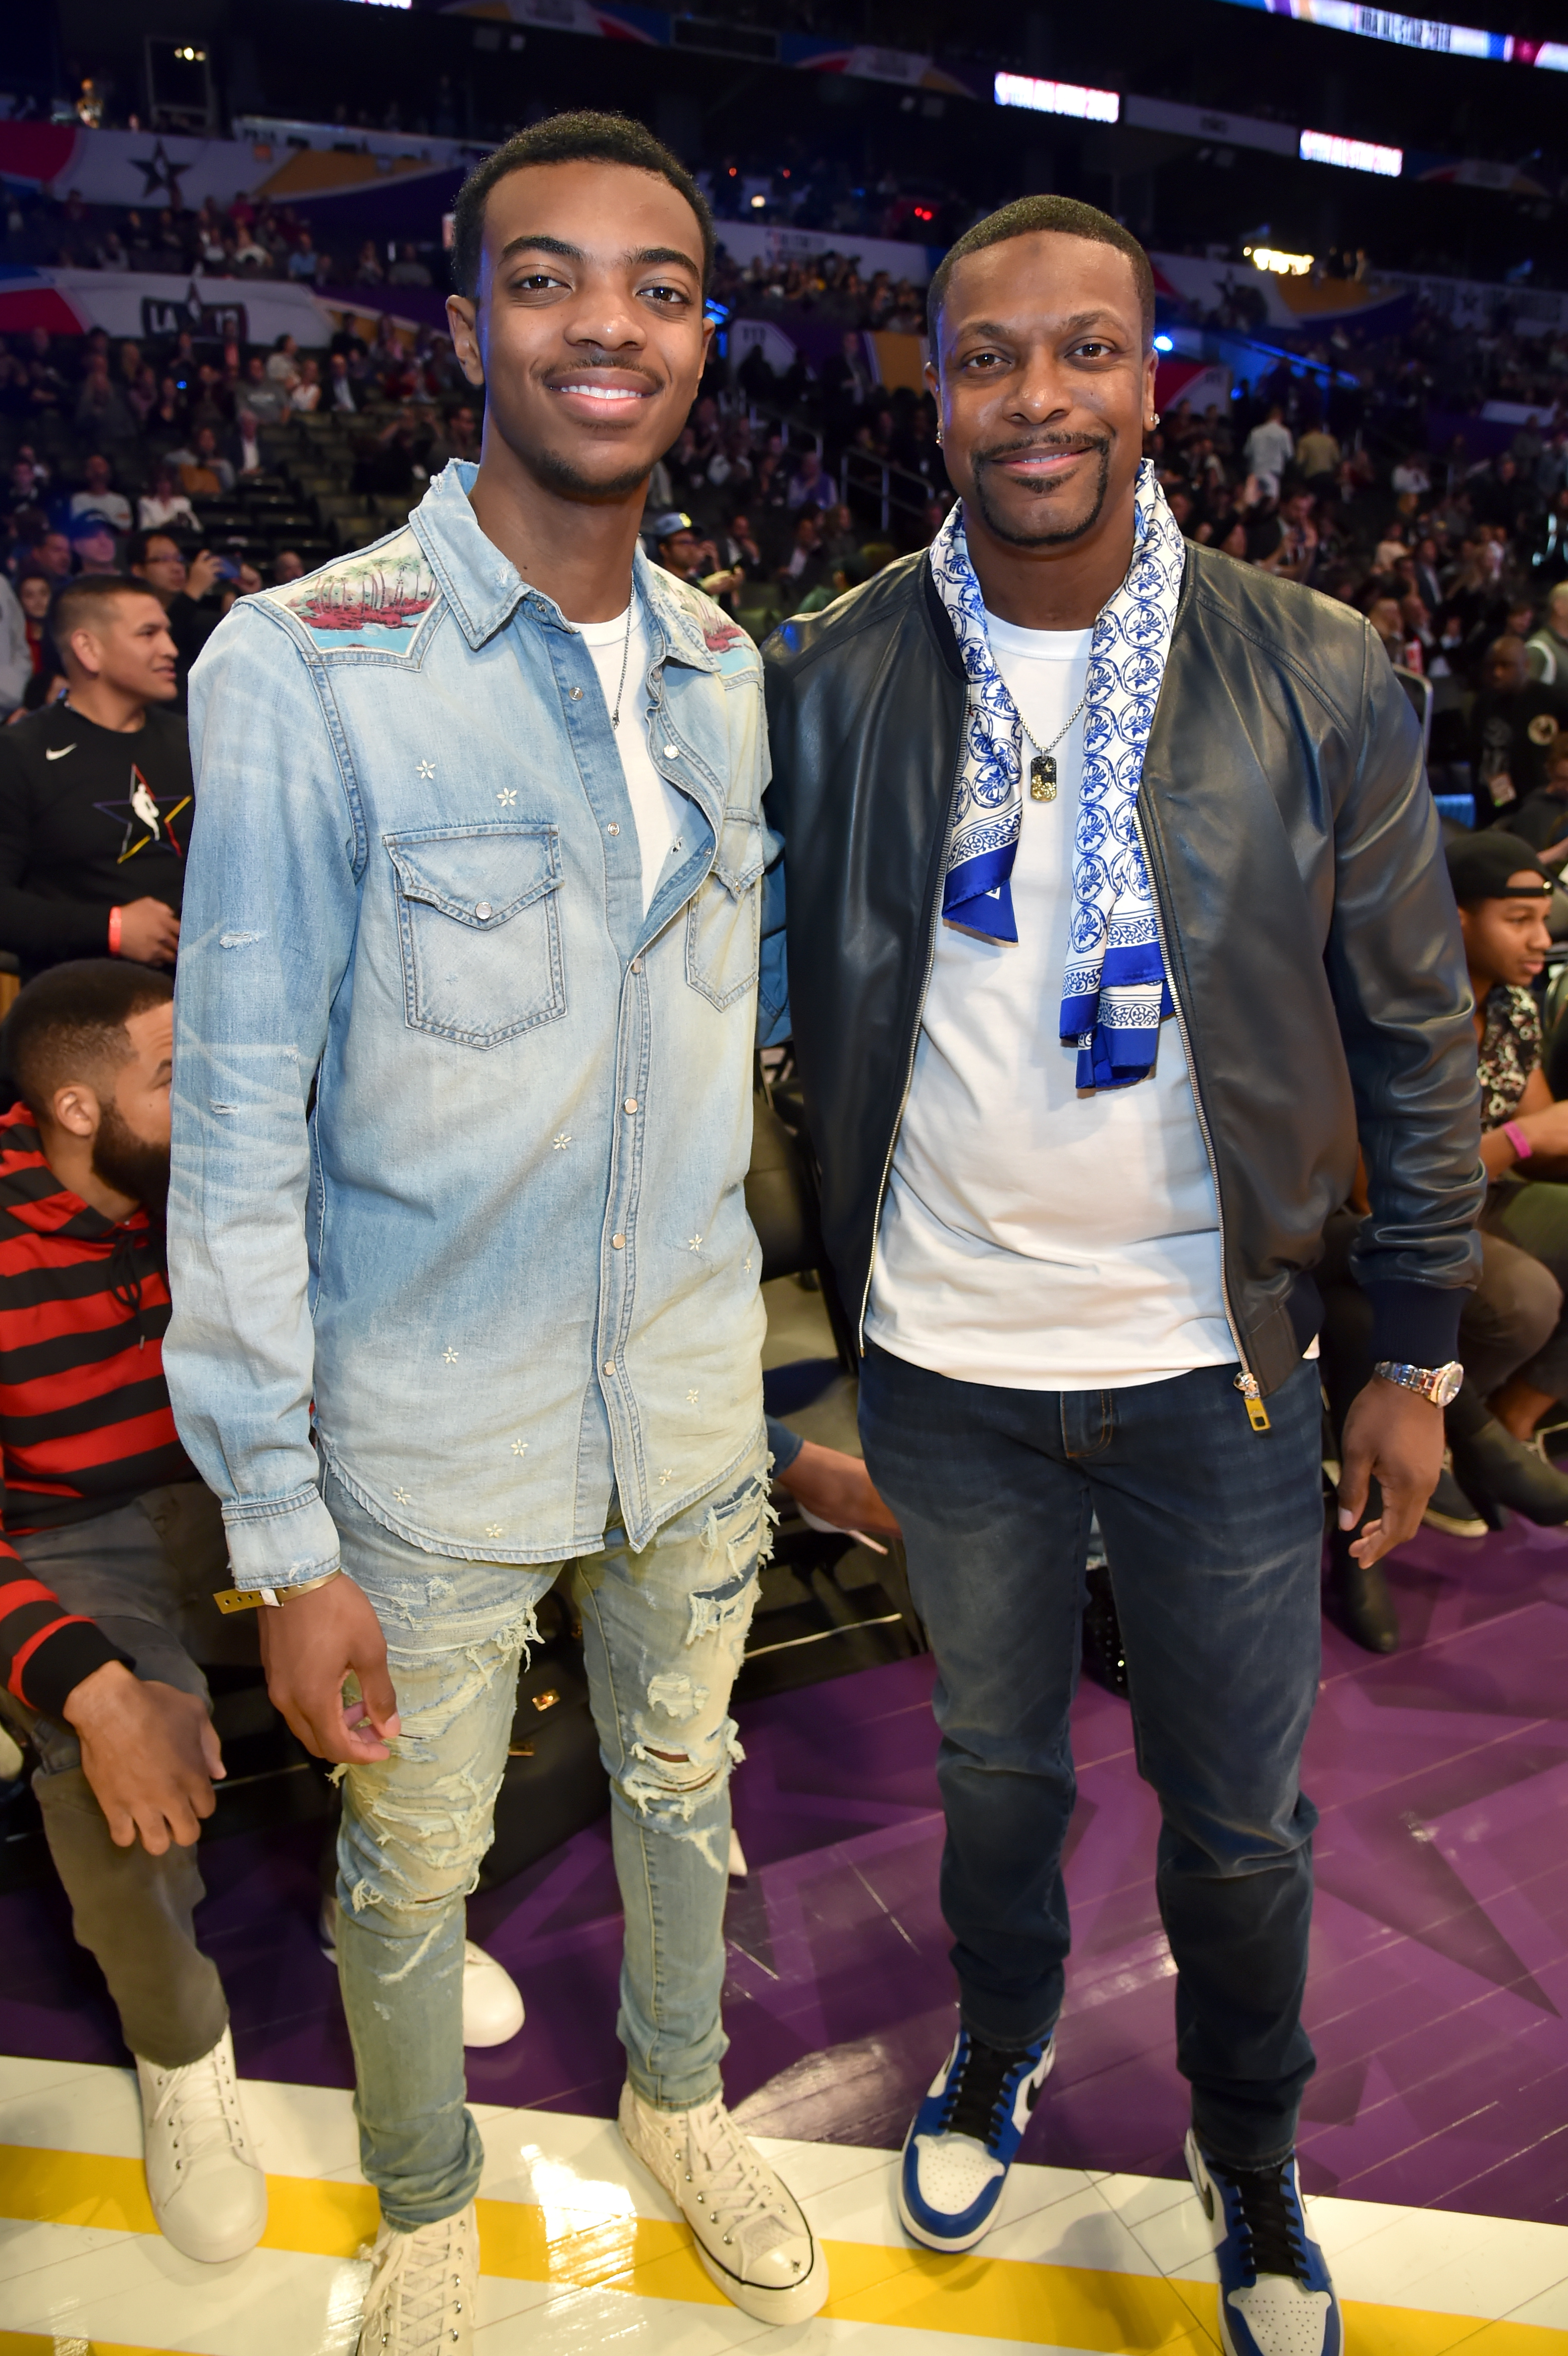 Destin Christopher Tucker and Chris Tucker during the 67th NBA All-Star Game at Staples Center on February 18, 2018, in Los Angeles, California. | Source: Getty Images